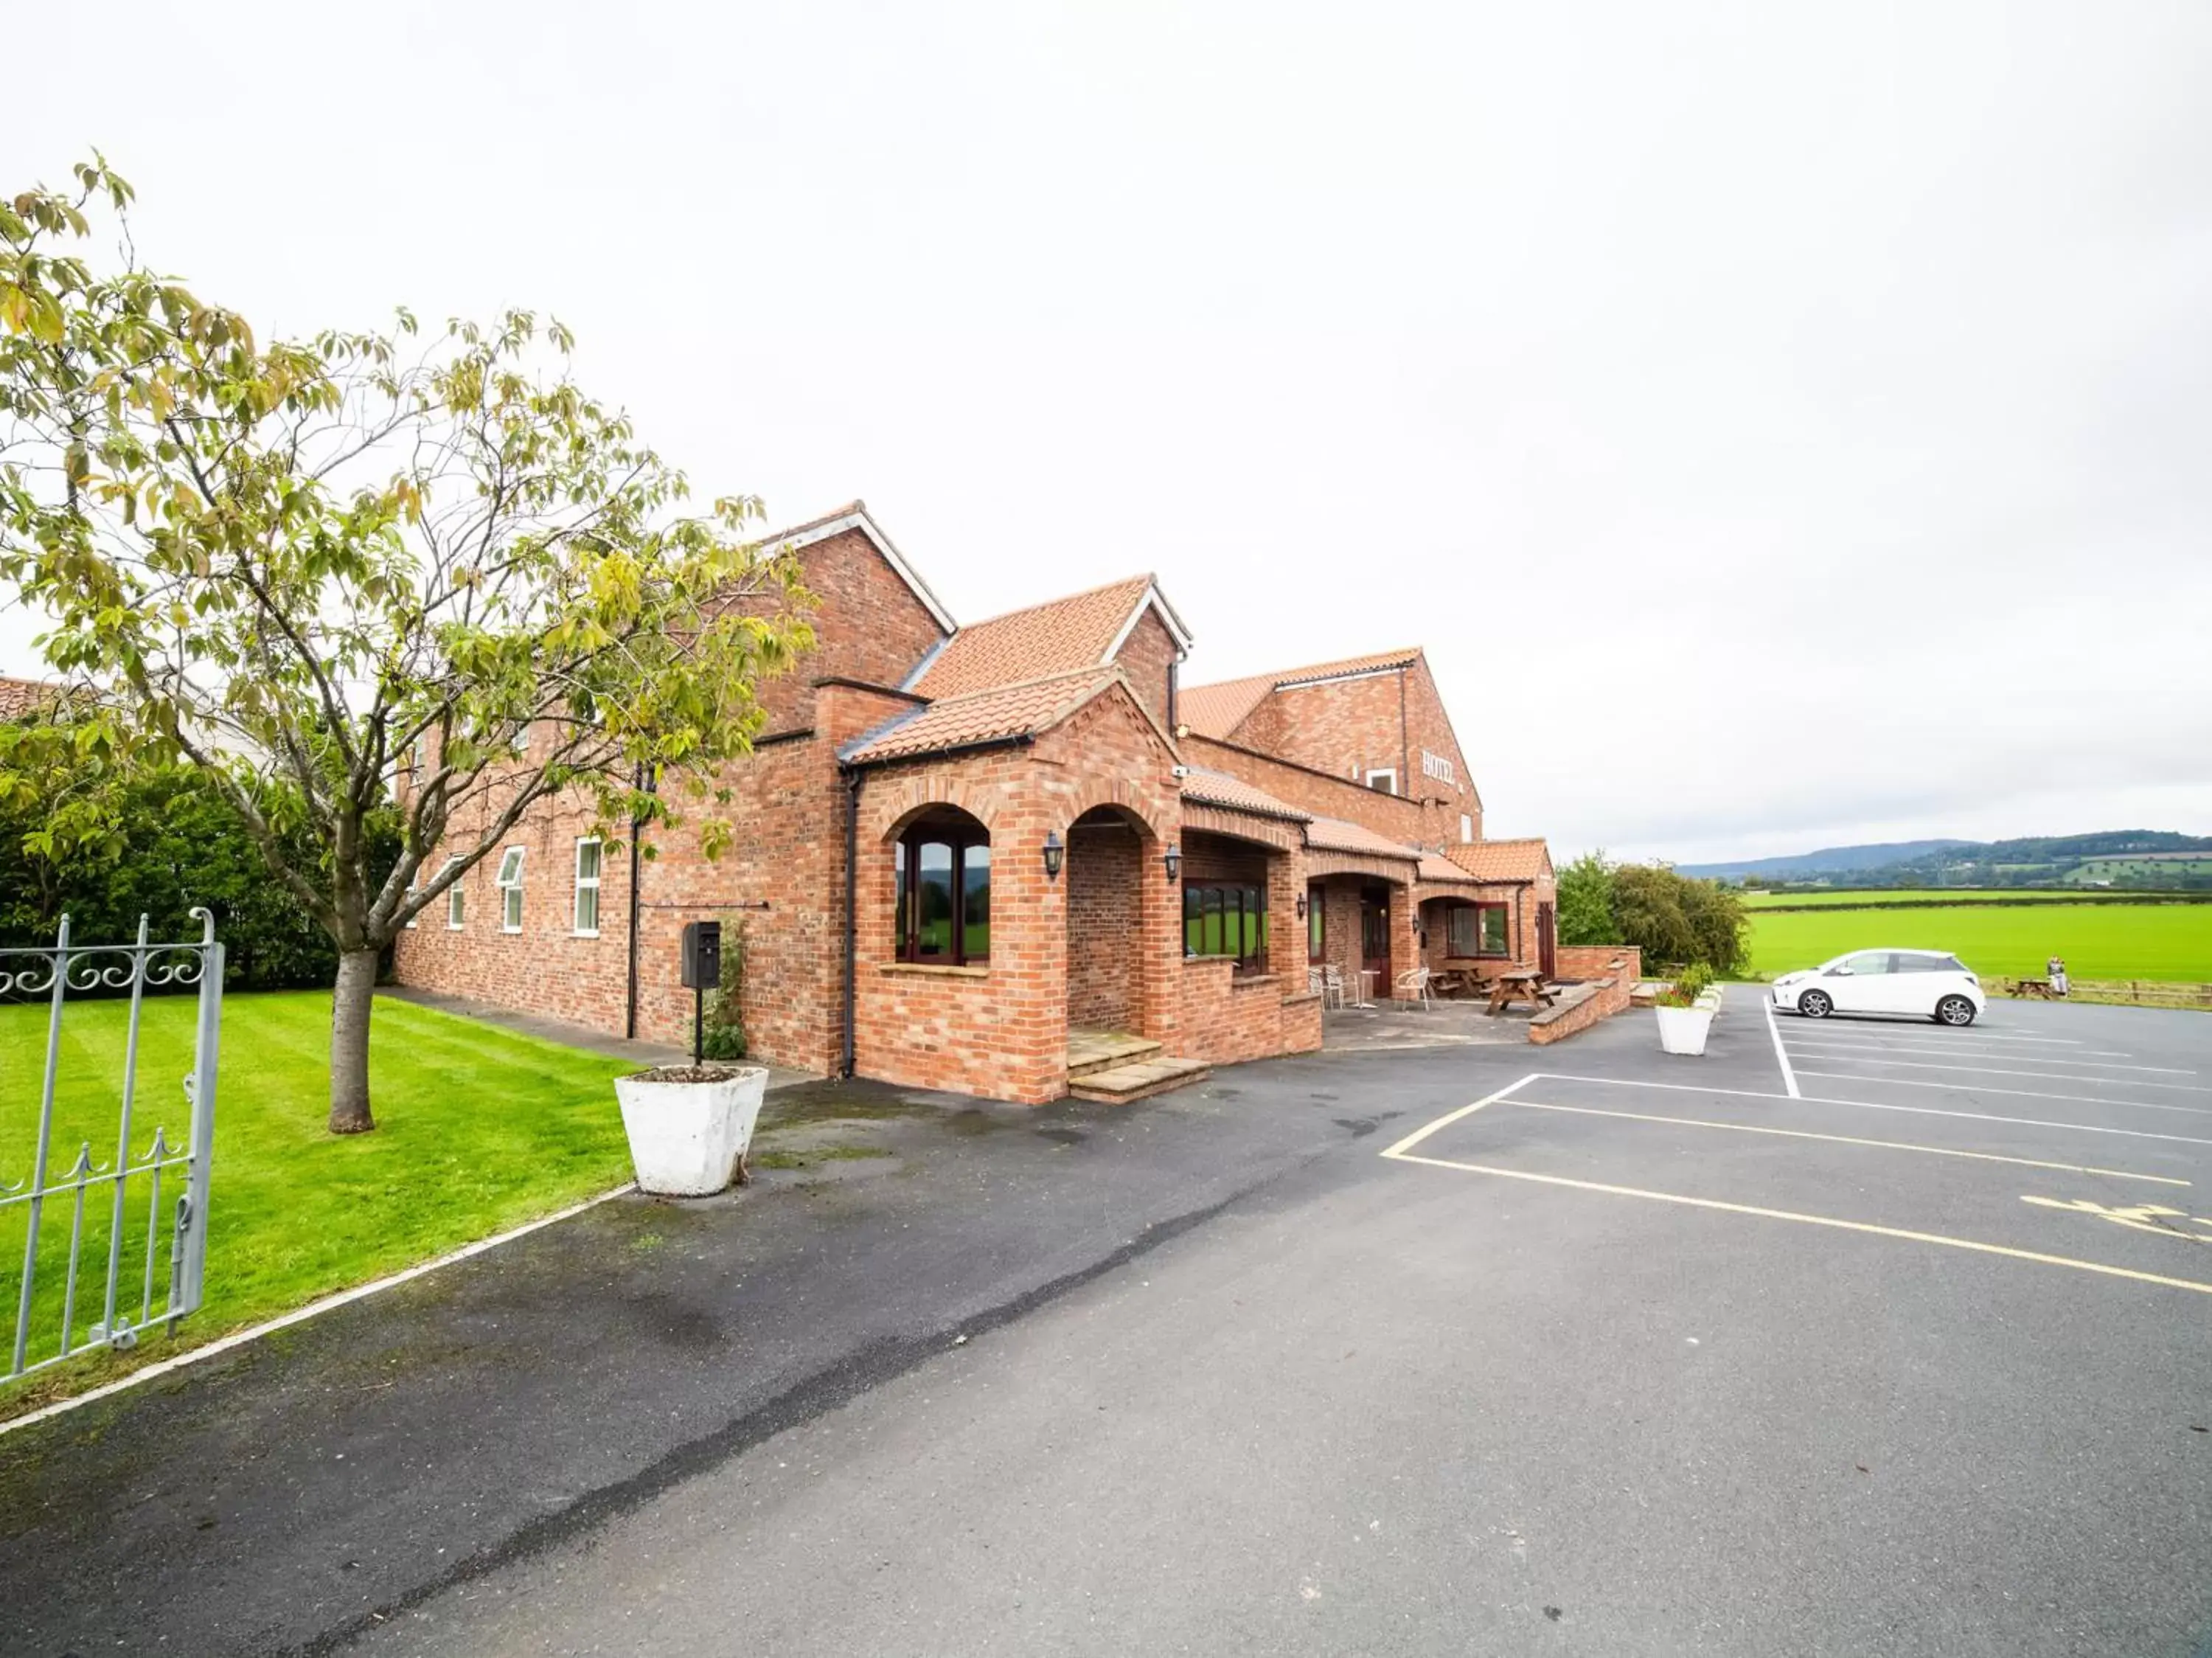 Property Building in OYO White Horse Lodge Hotel, East Thirsk